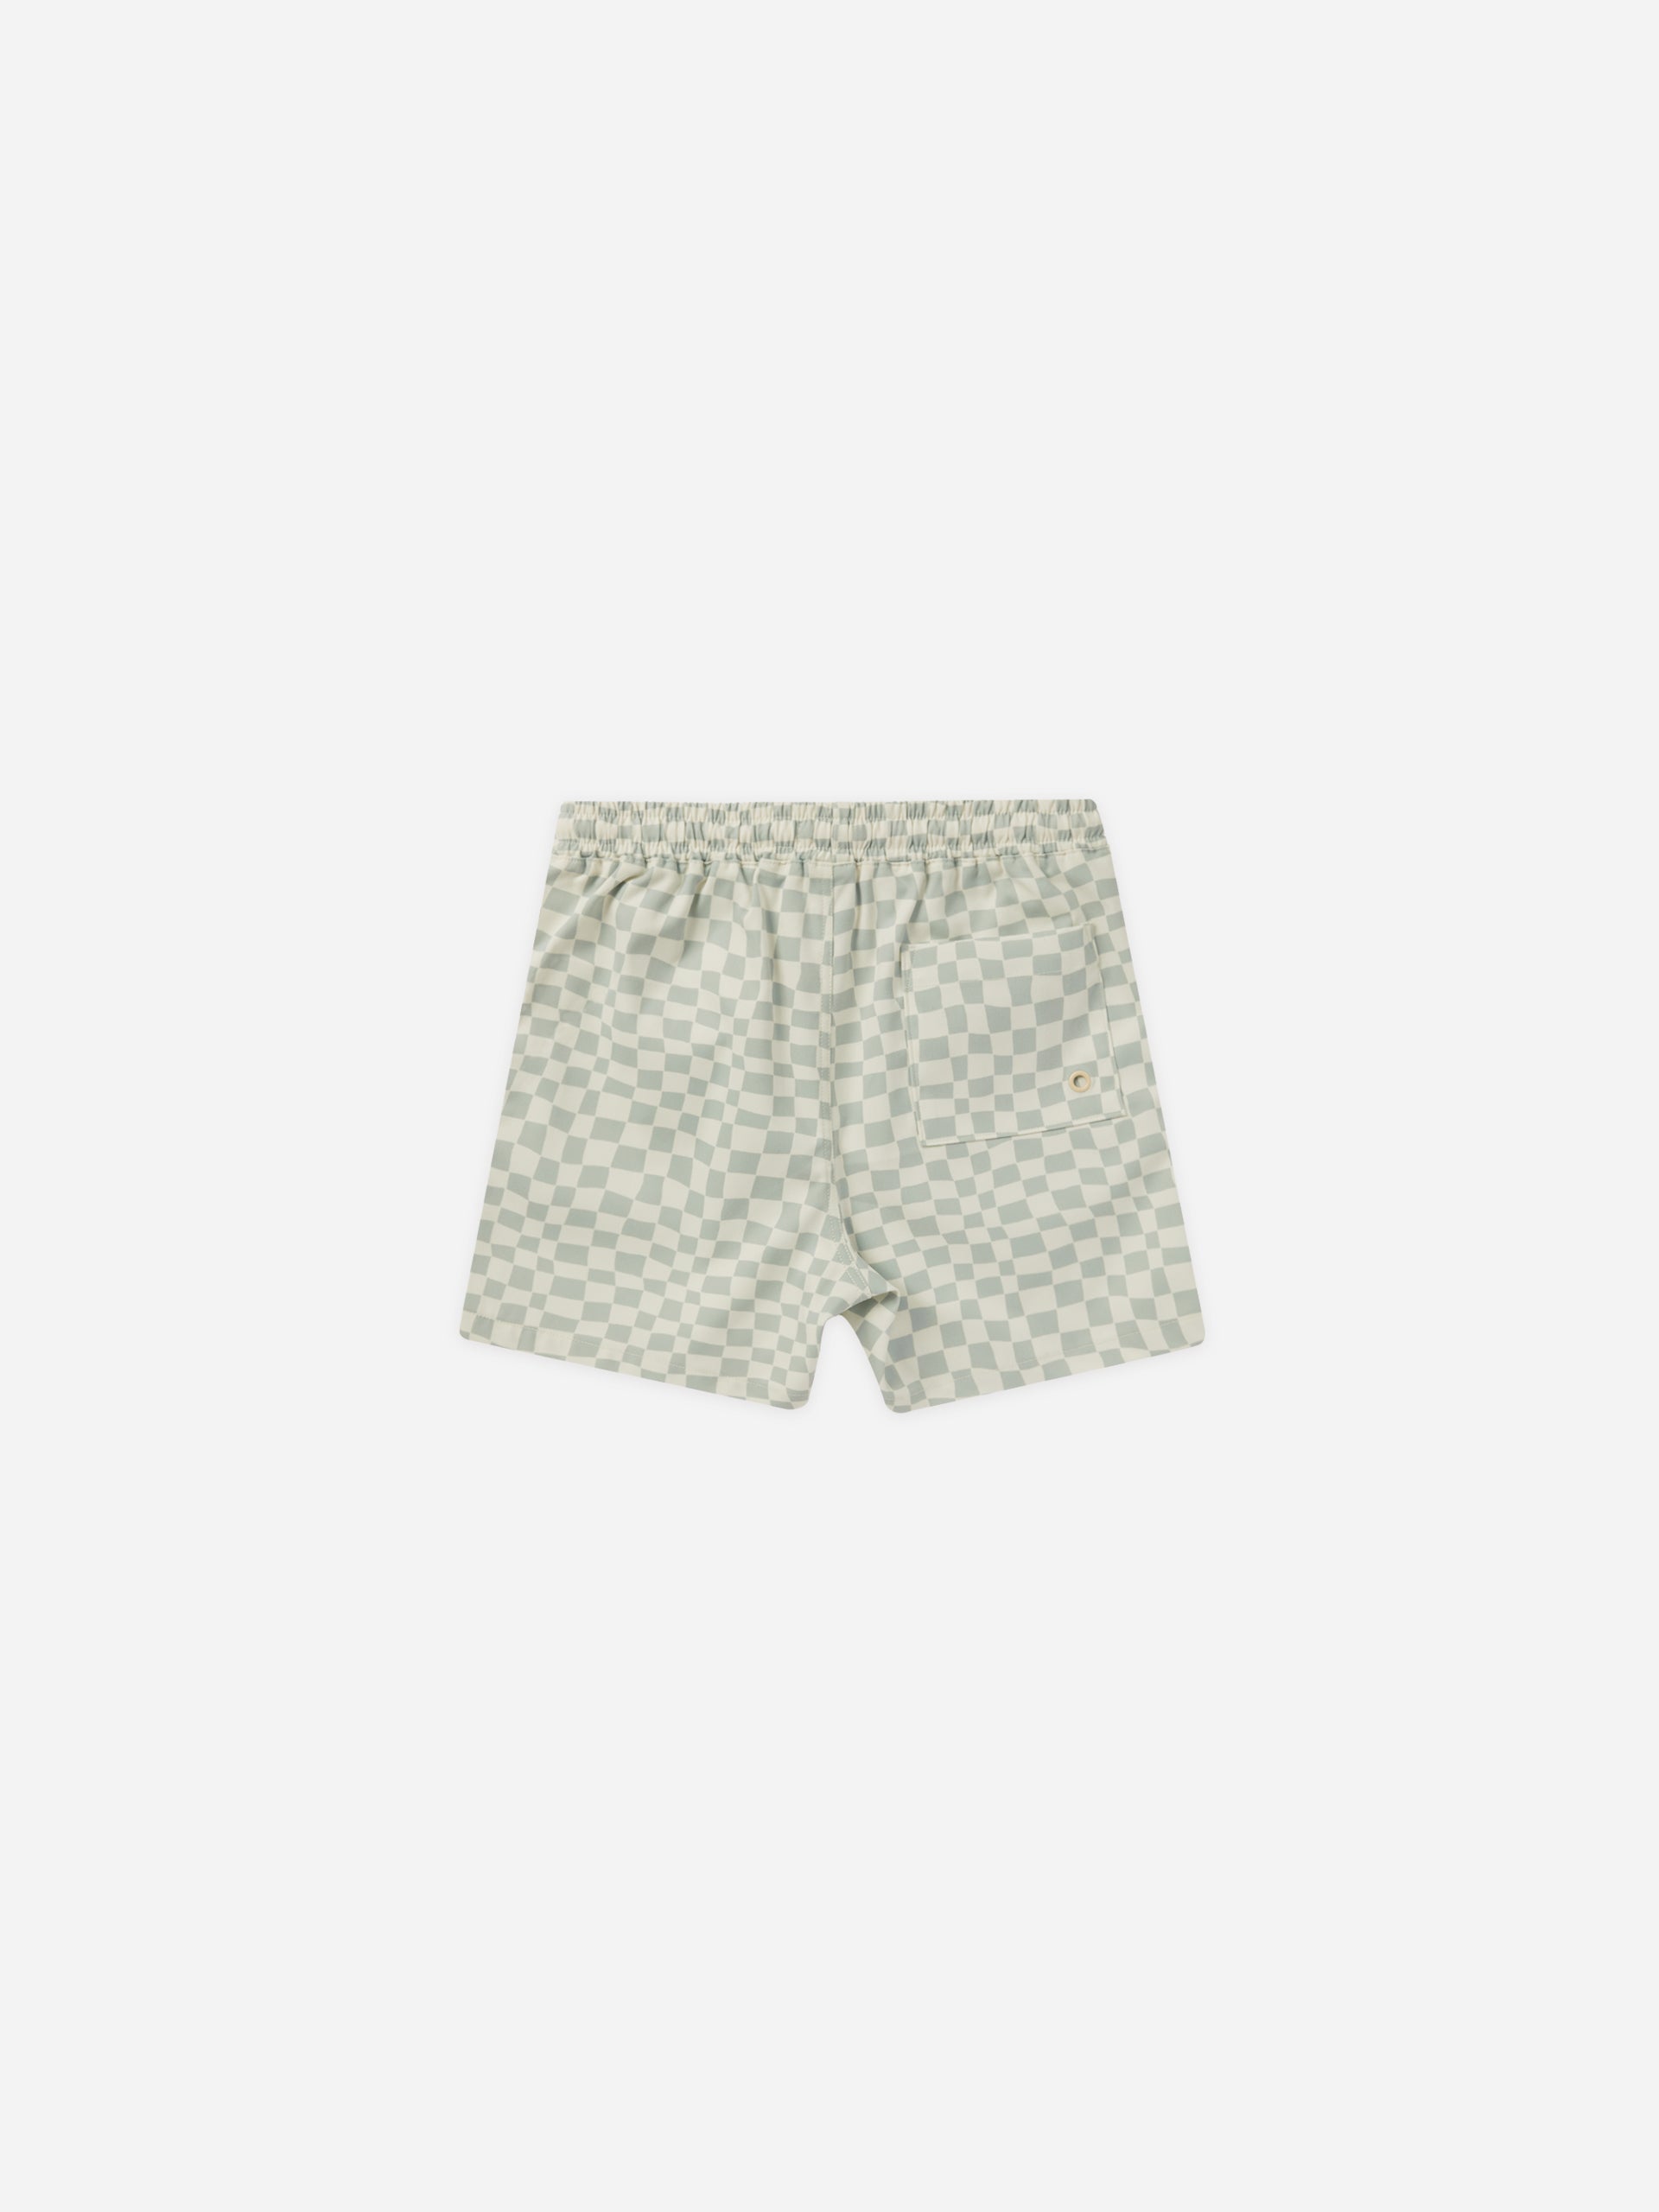 Boardshort || Seafoam Check - Rylee + Cru | Kids Clothes | Trendy Baby Clothes | Modern Infant Outfits |